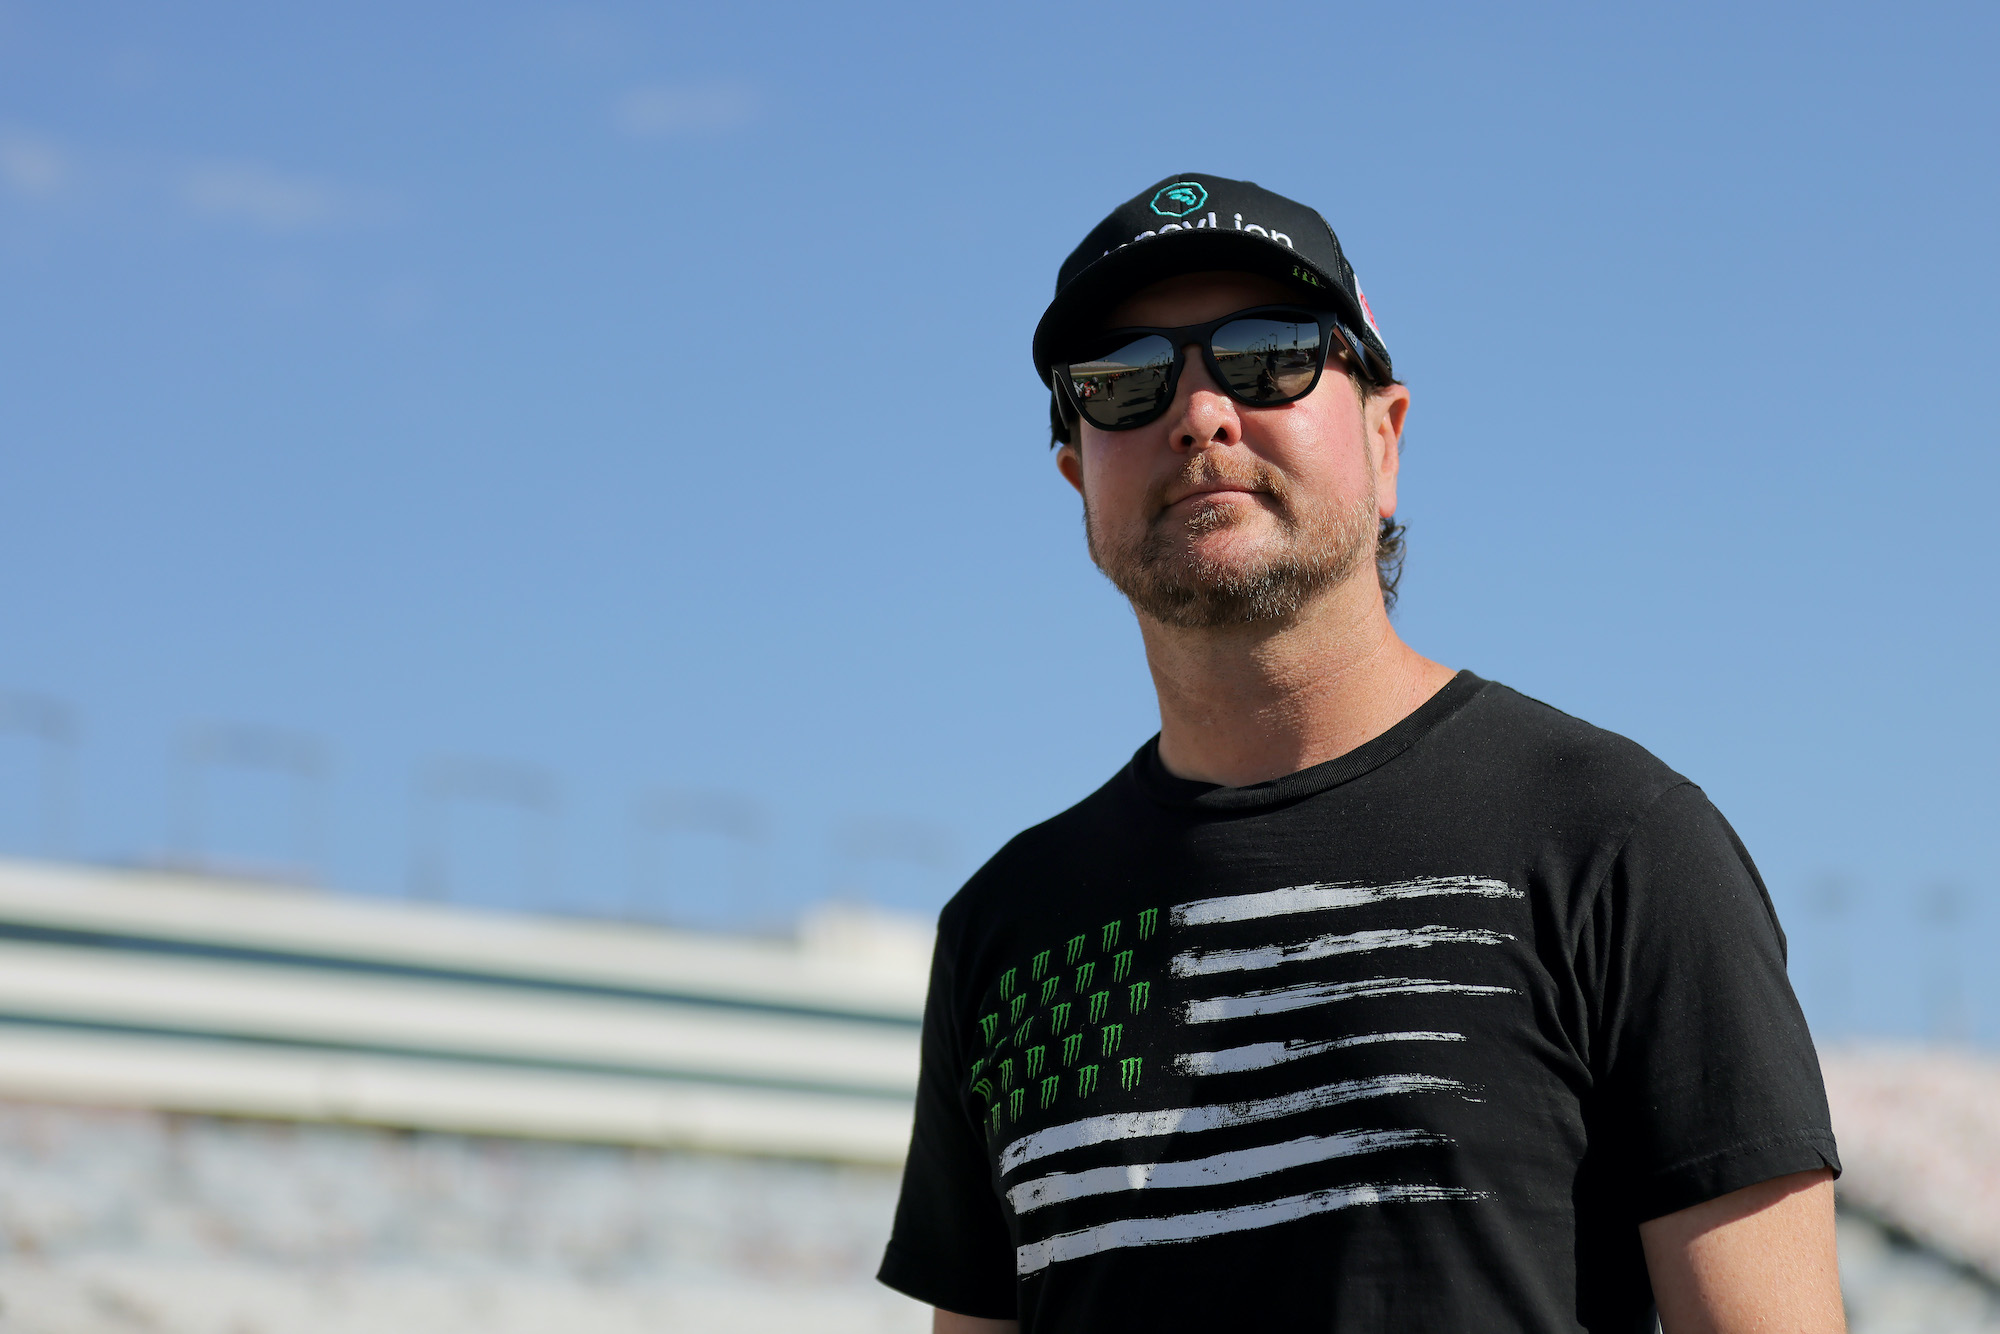 Kurt Busch Racing Part-Time in 2023 Appears More Likely, According to Denny Hamlin’s Latest Comments